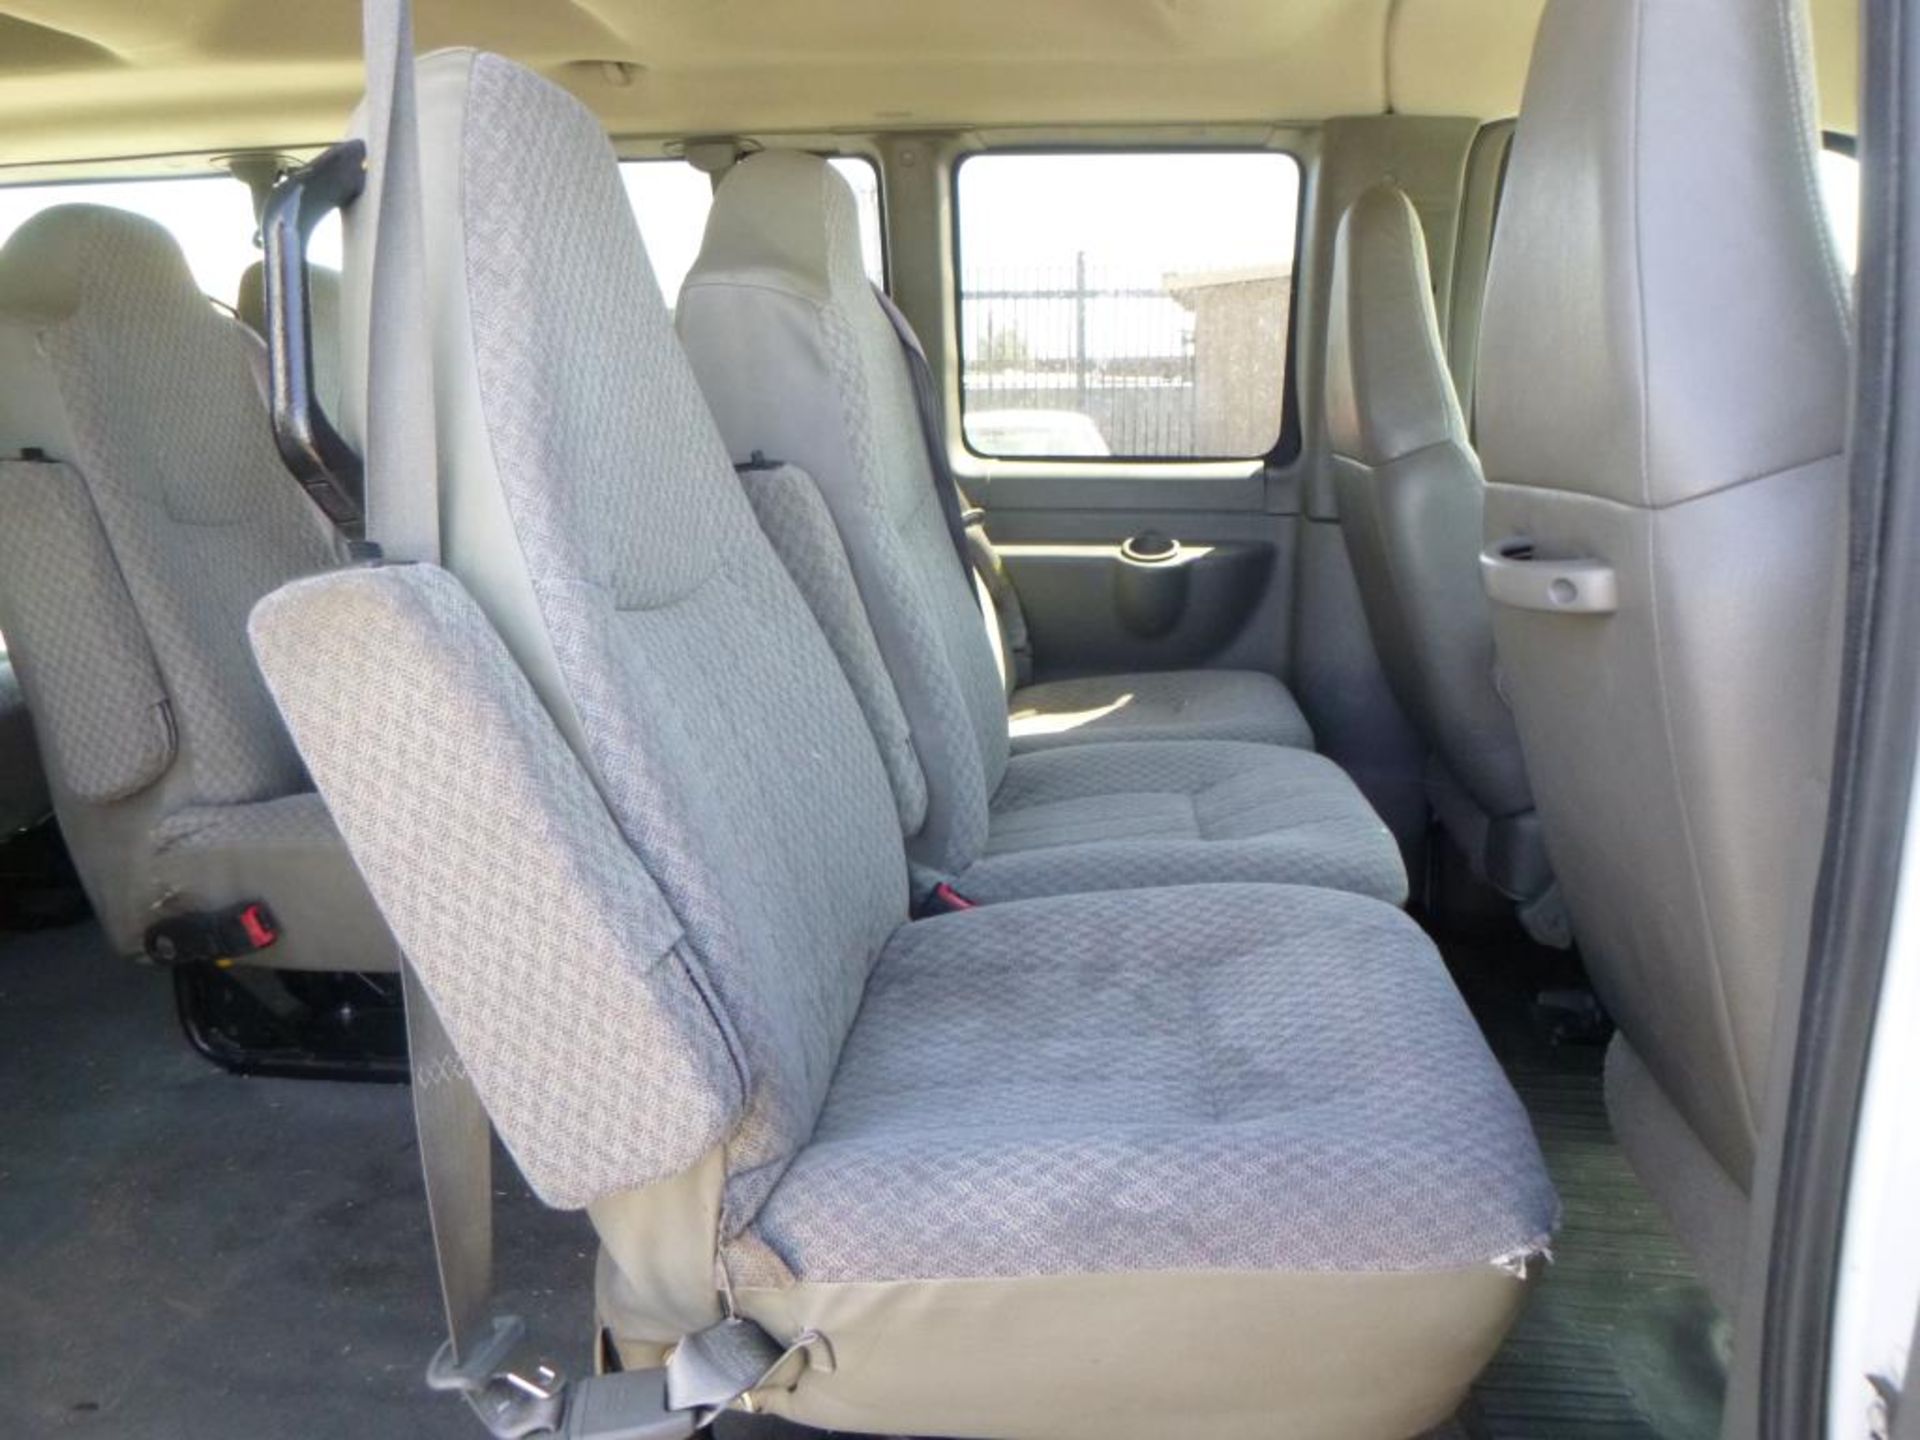 2008 Chevrolet Express - Image 7 of 14